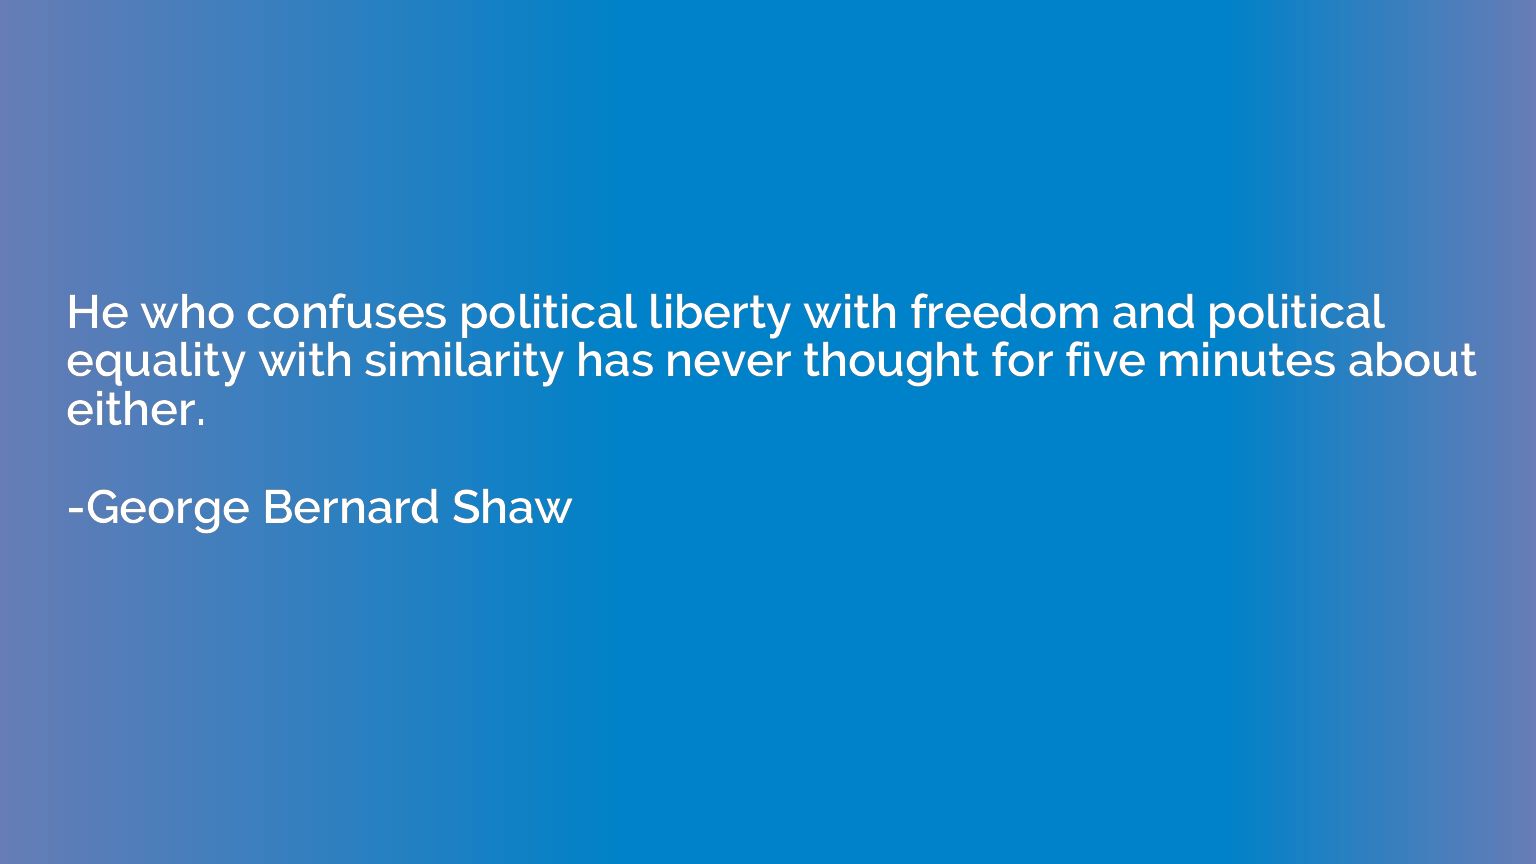 He who confuses political liberty with freedom and political